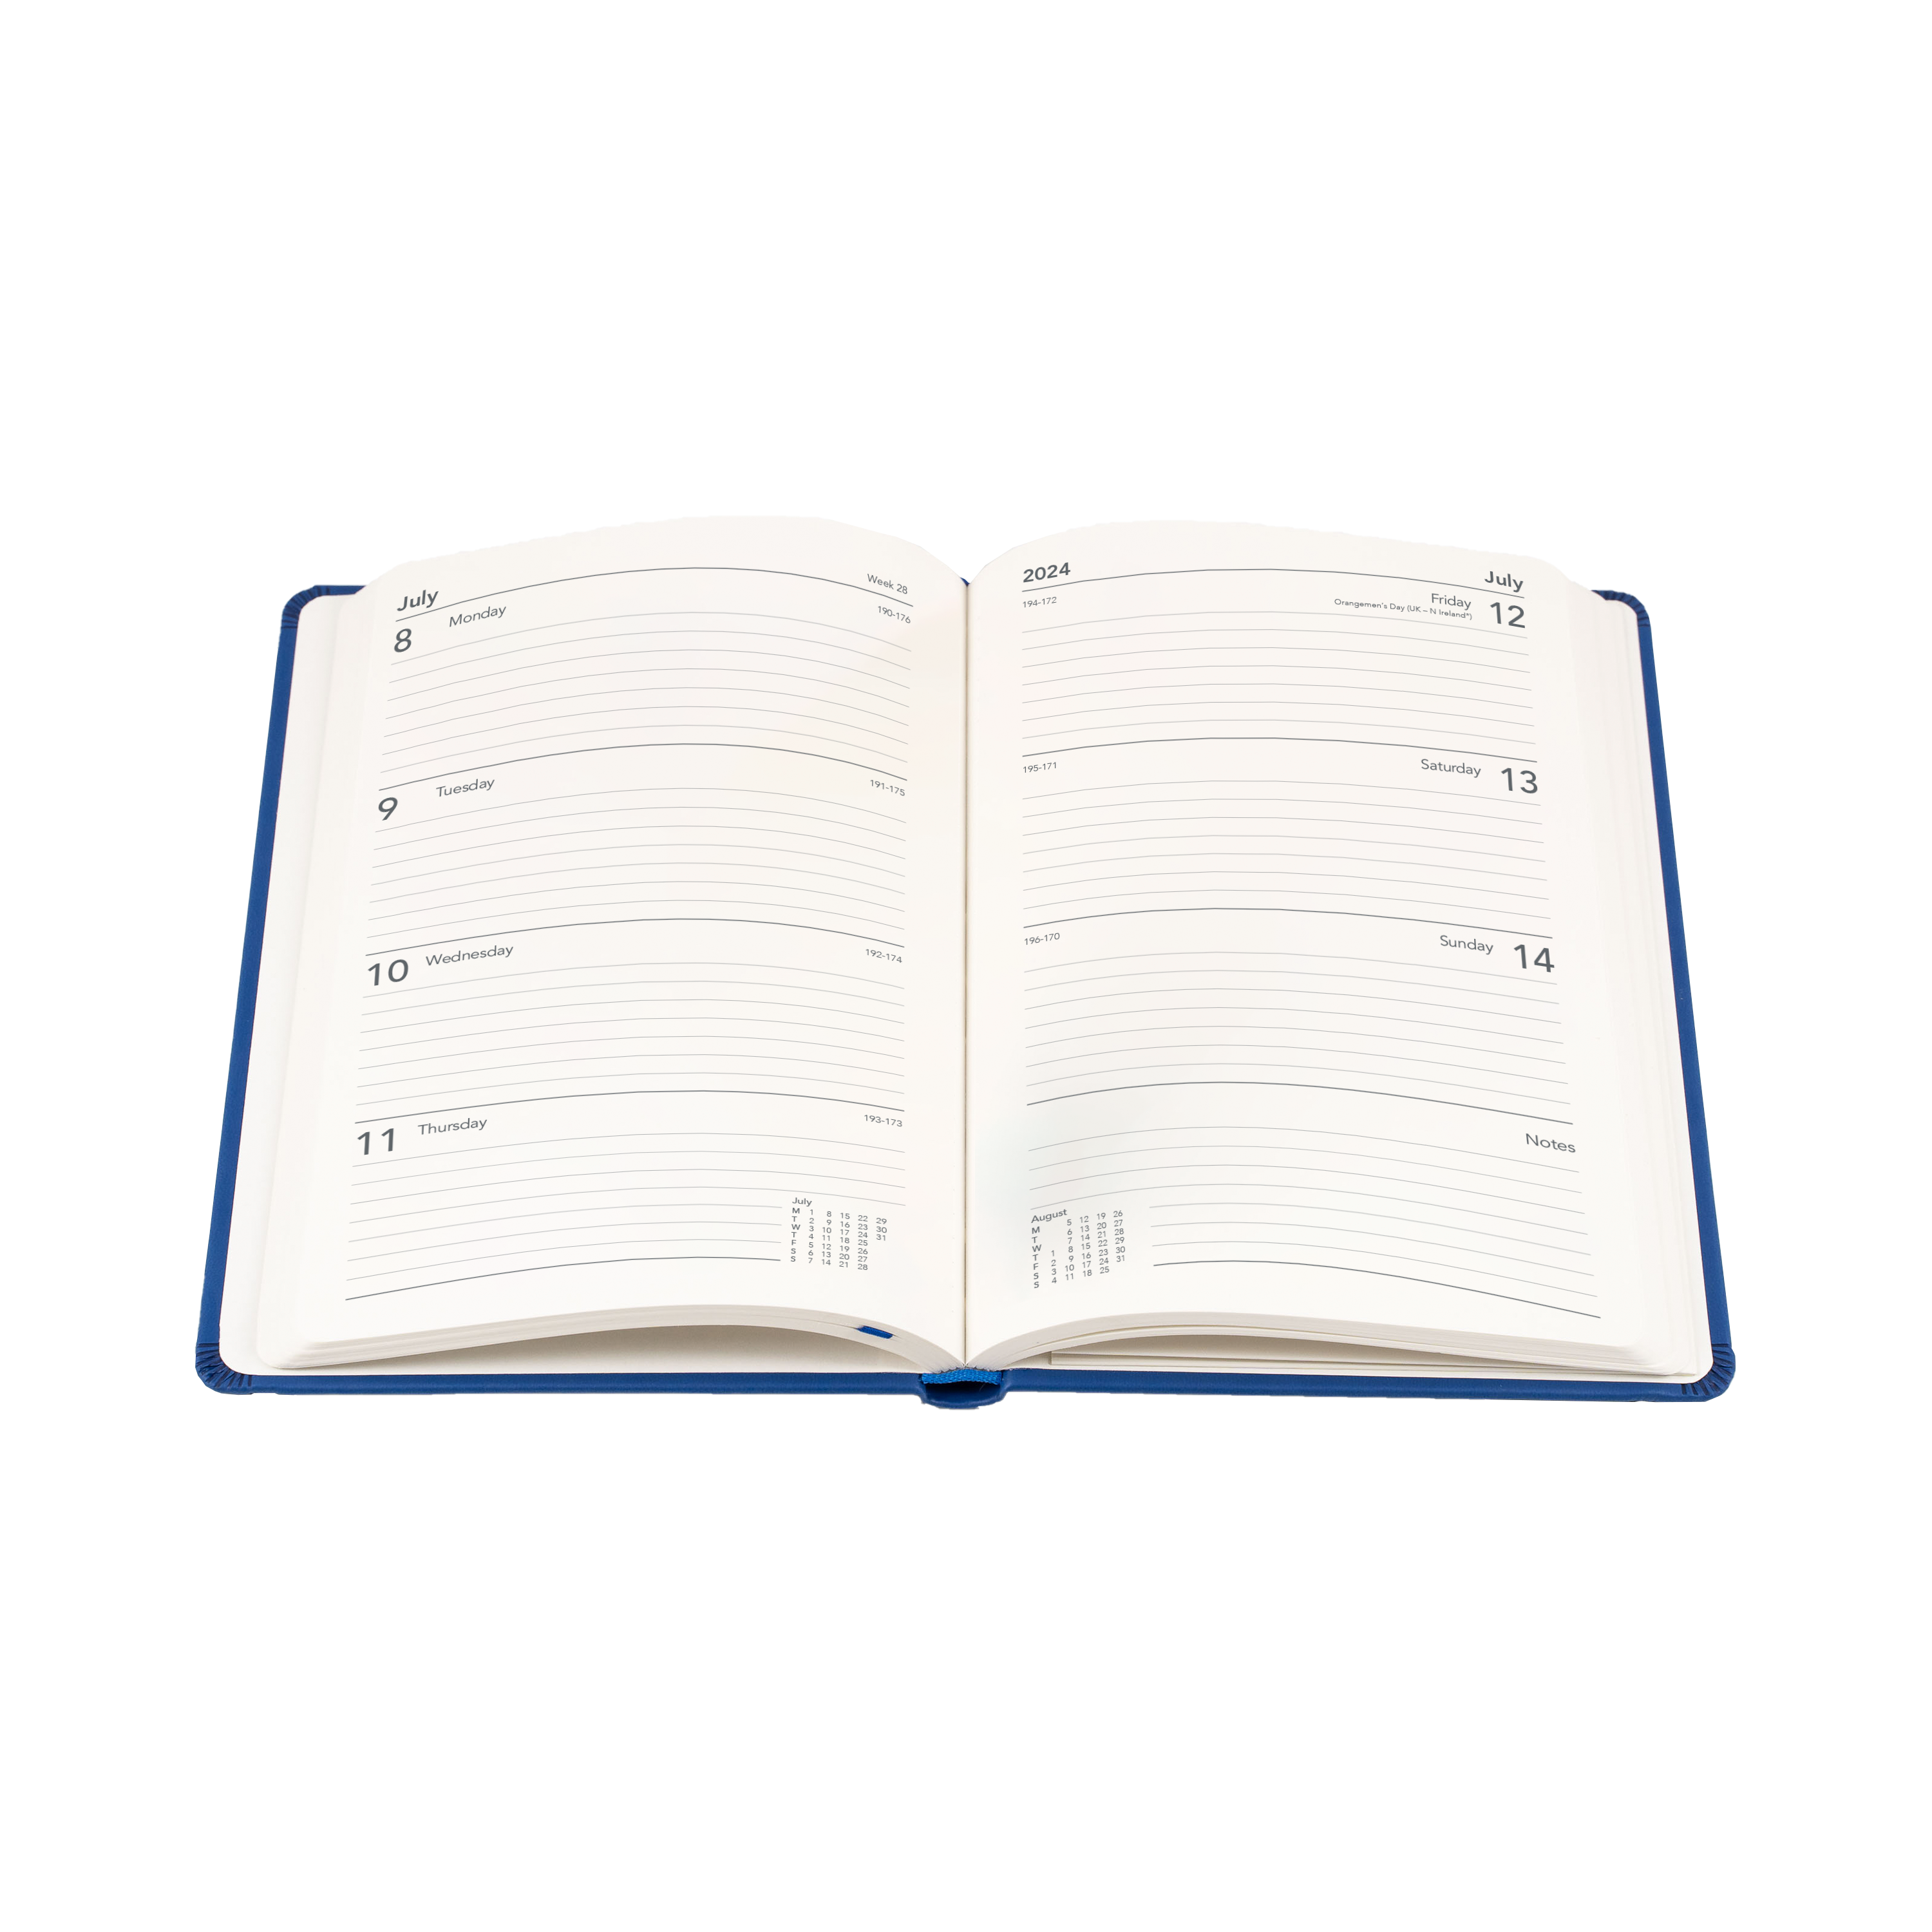 Collins Legacy - 2024 Weekly Lifestyle Planner - A5 Week-to-View Diary (CL53-24)